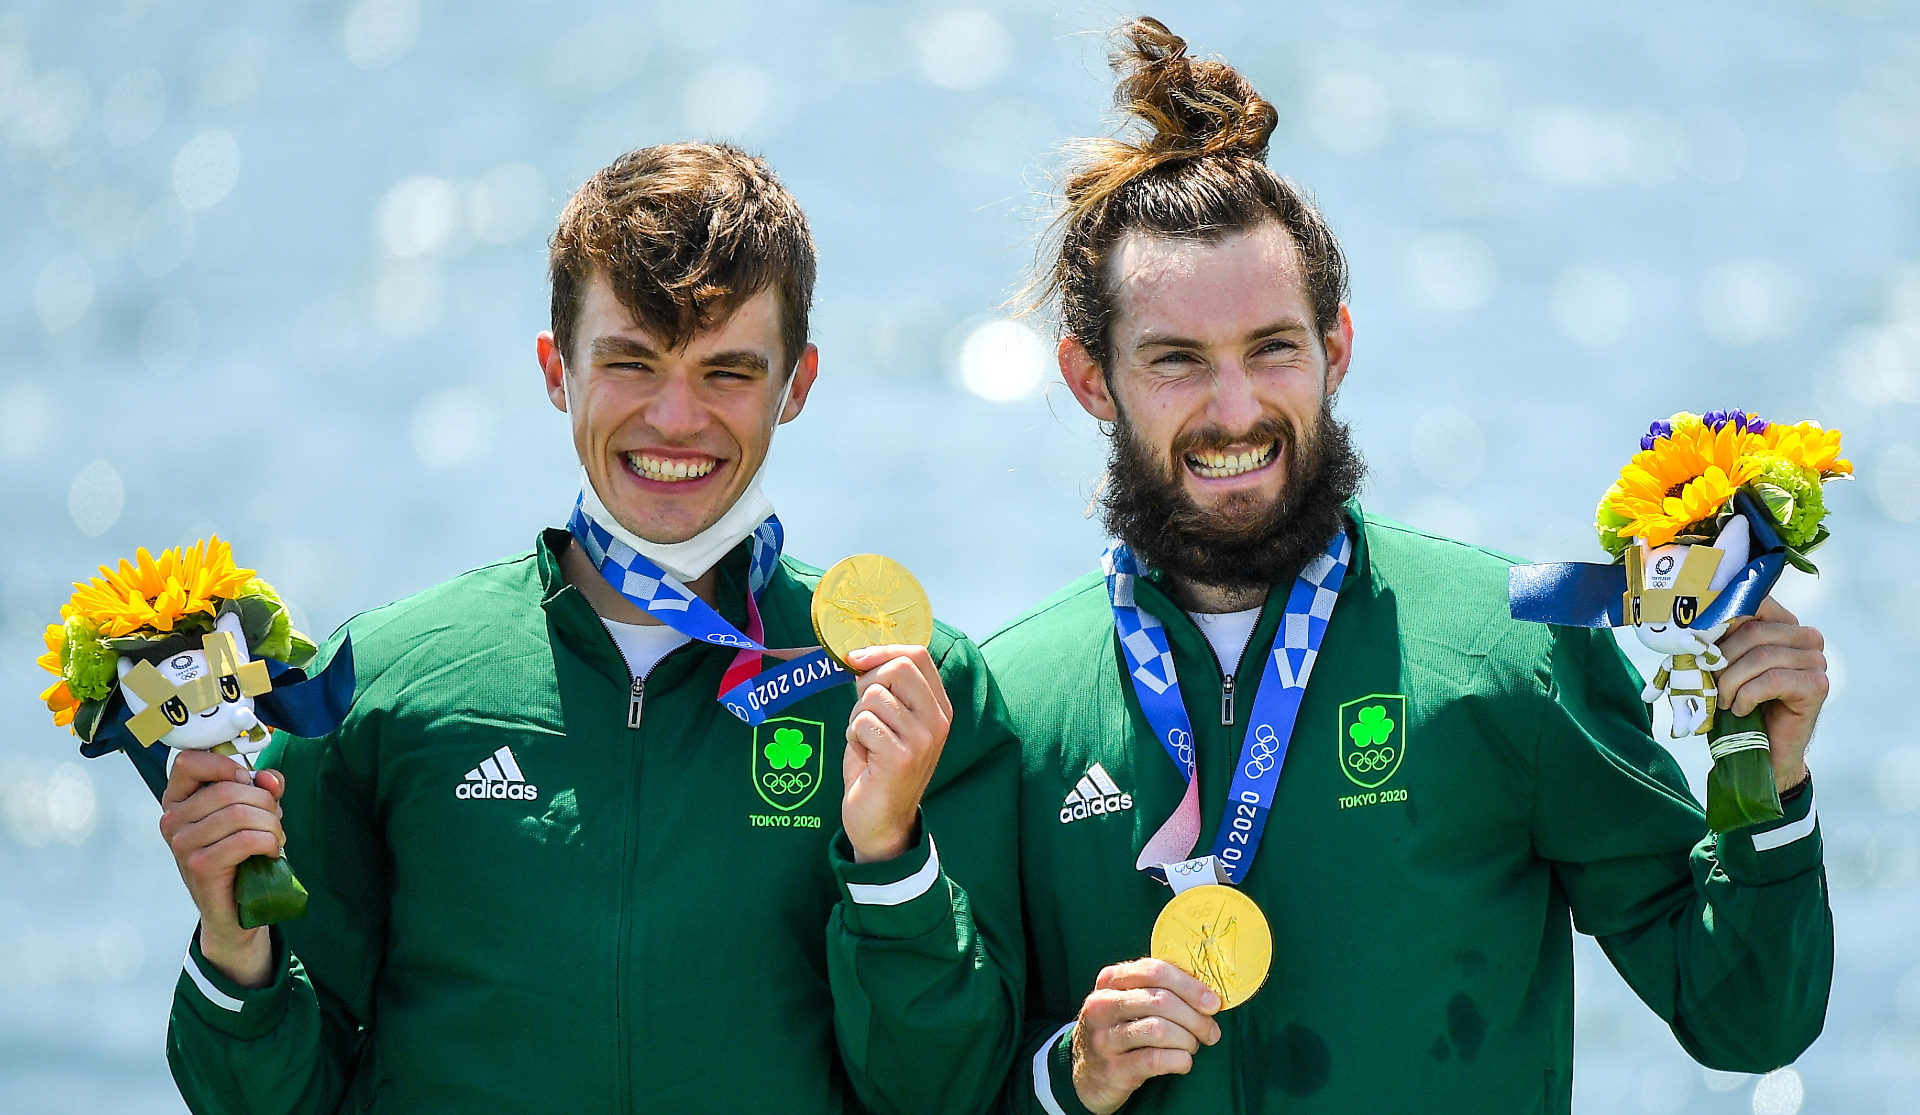 UCC student and alumnus win Olympic Gold